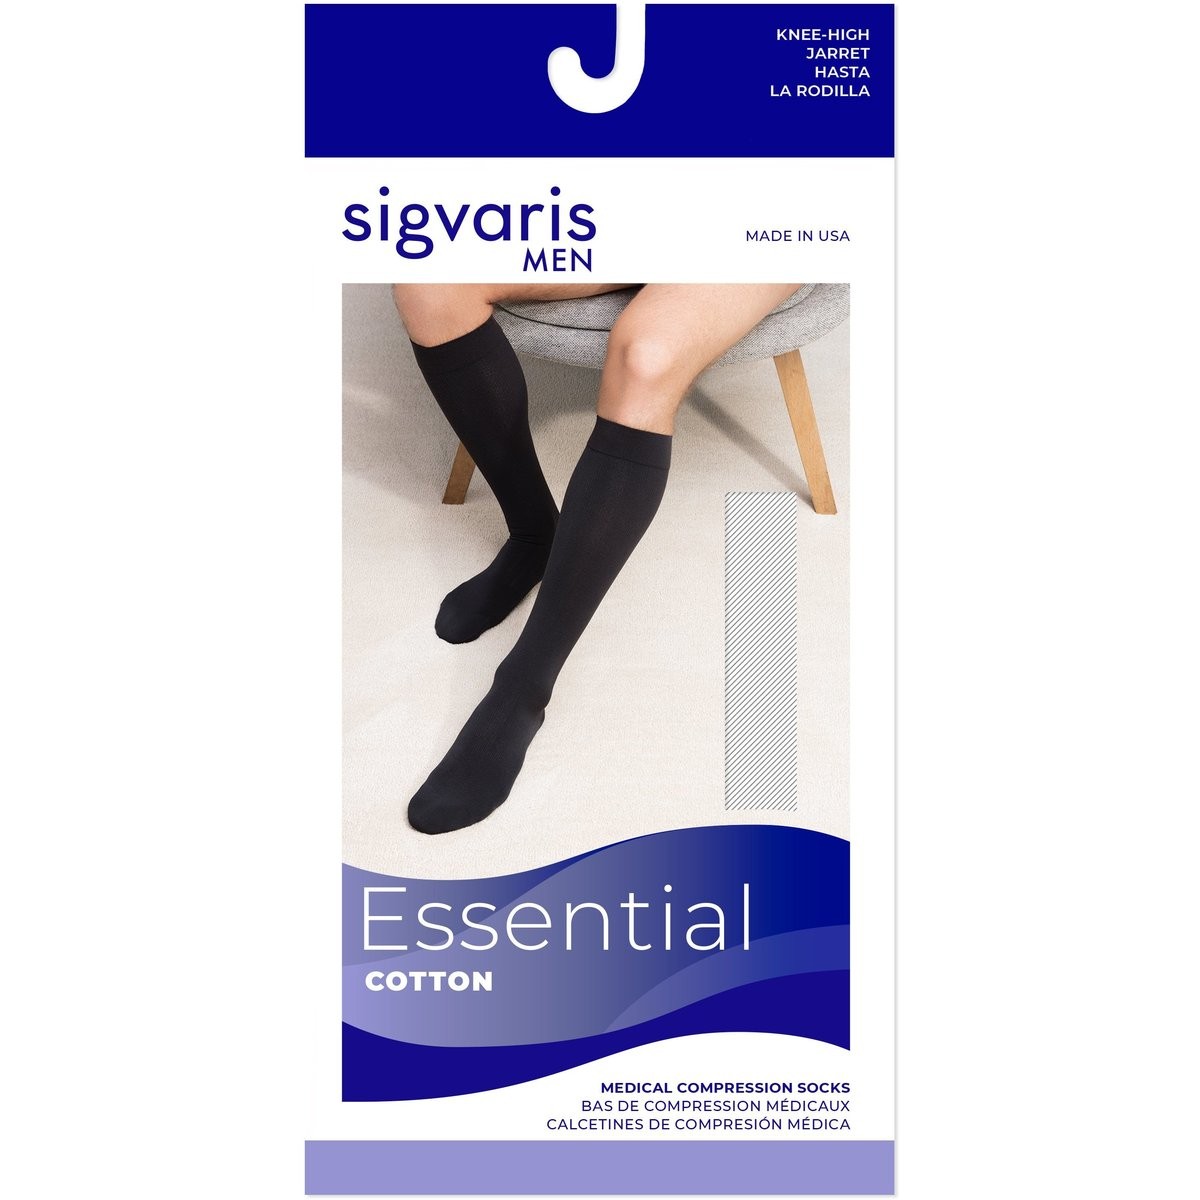 Sigvaris Women's Essential Cotton Knee High Compression Stocking